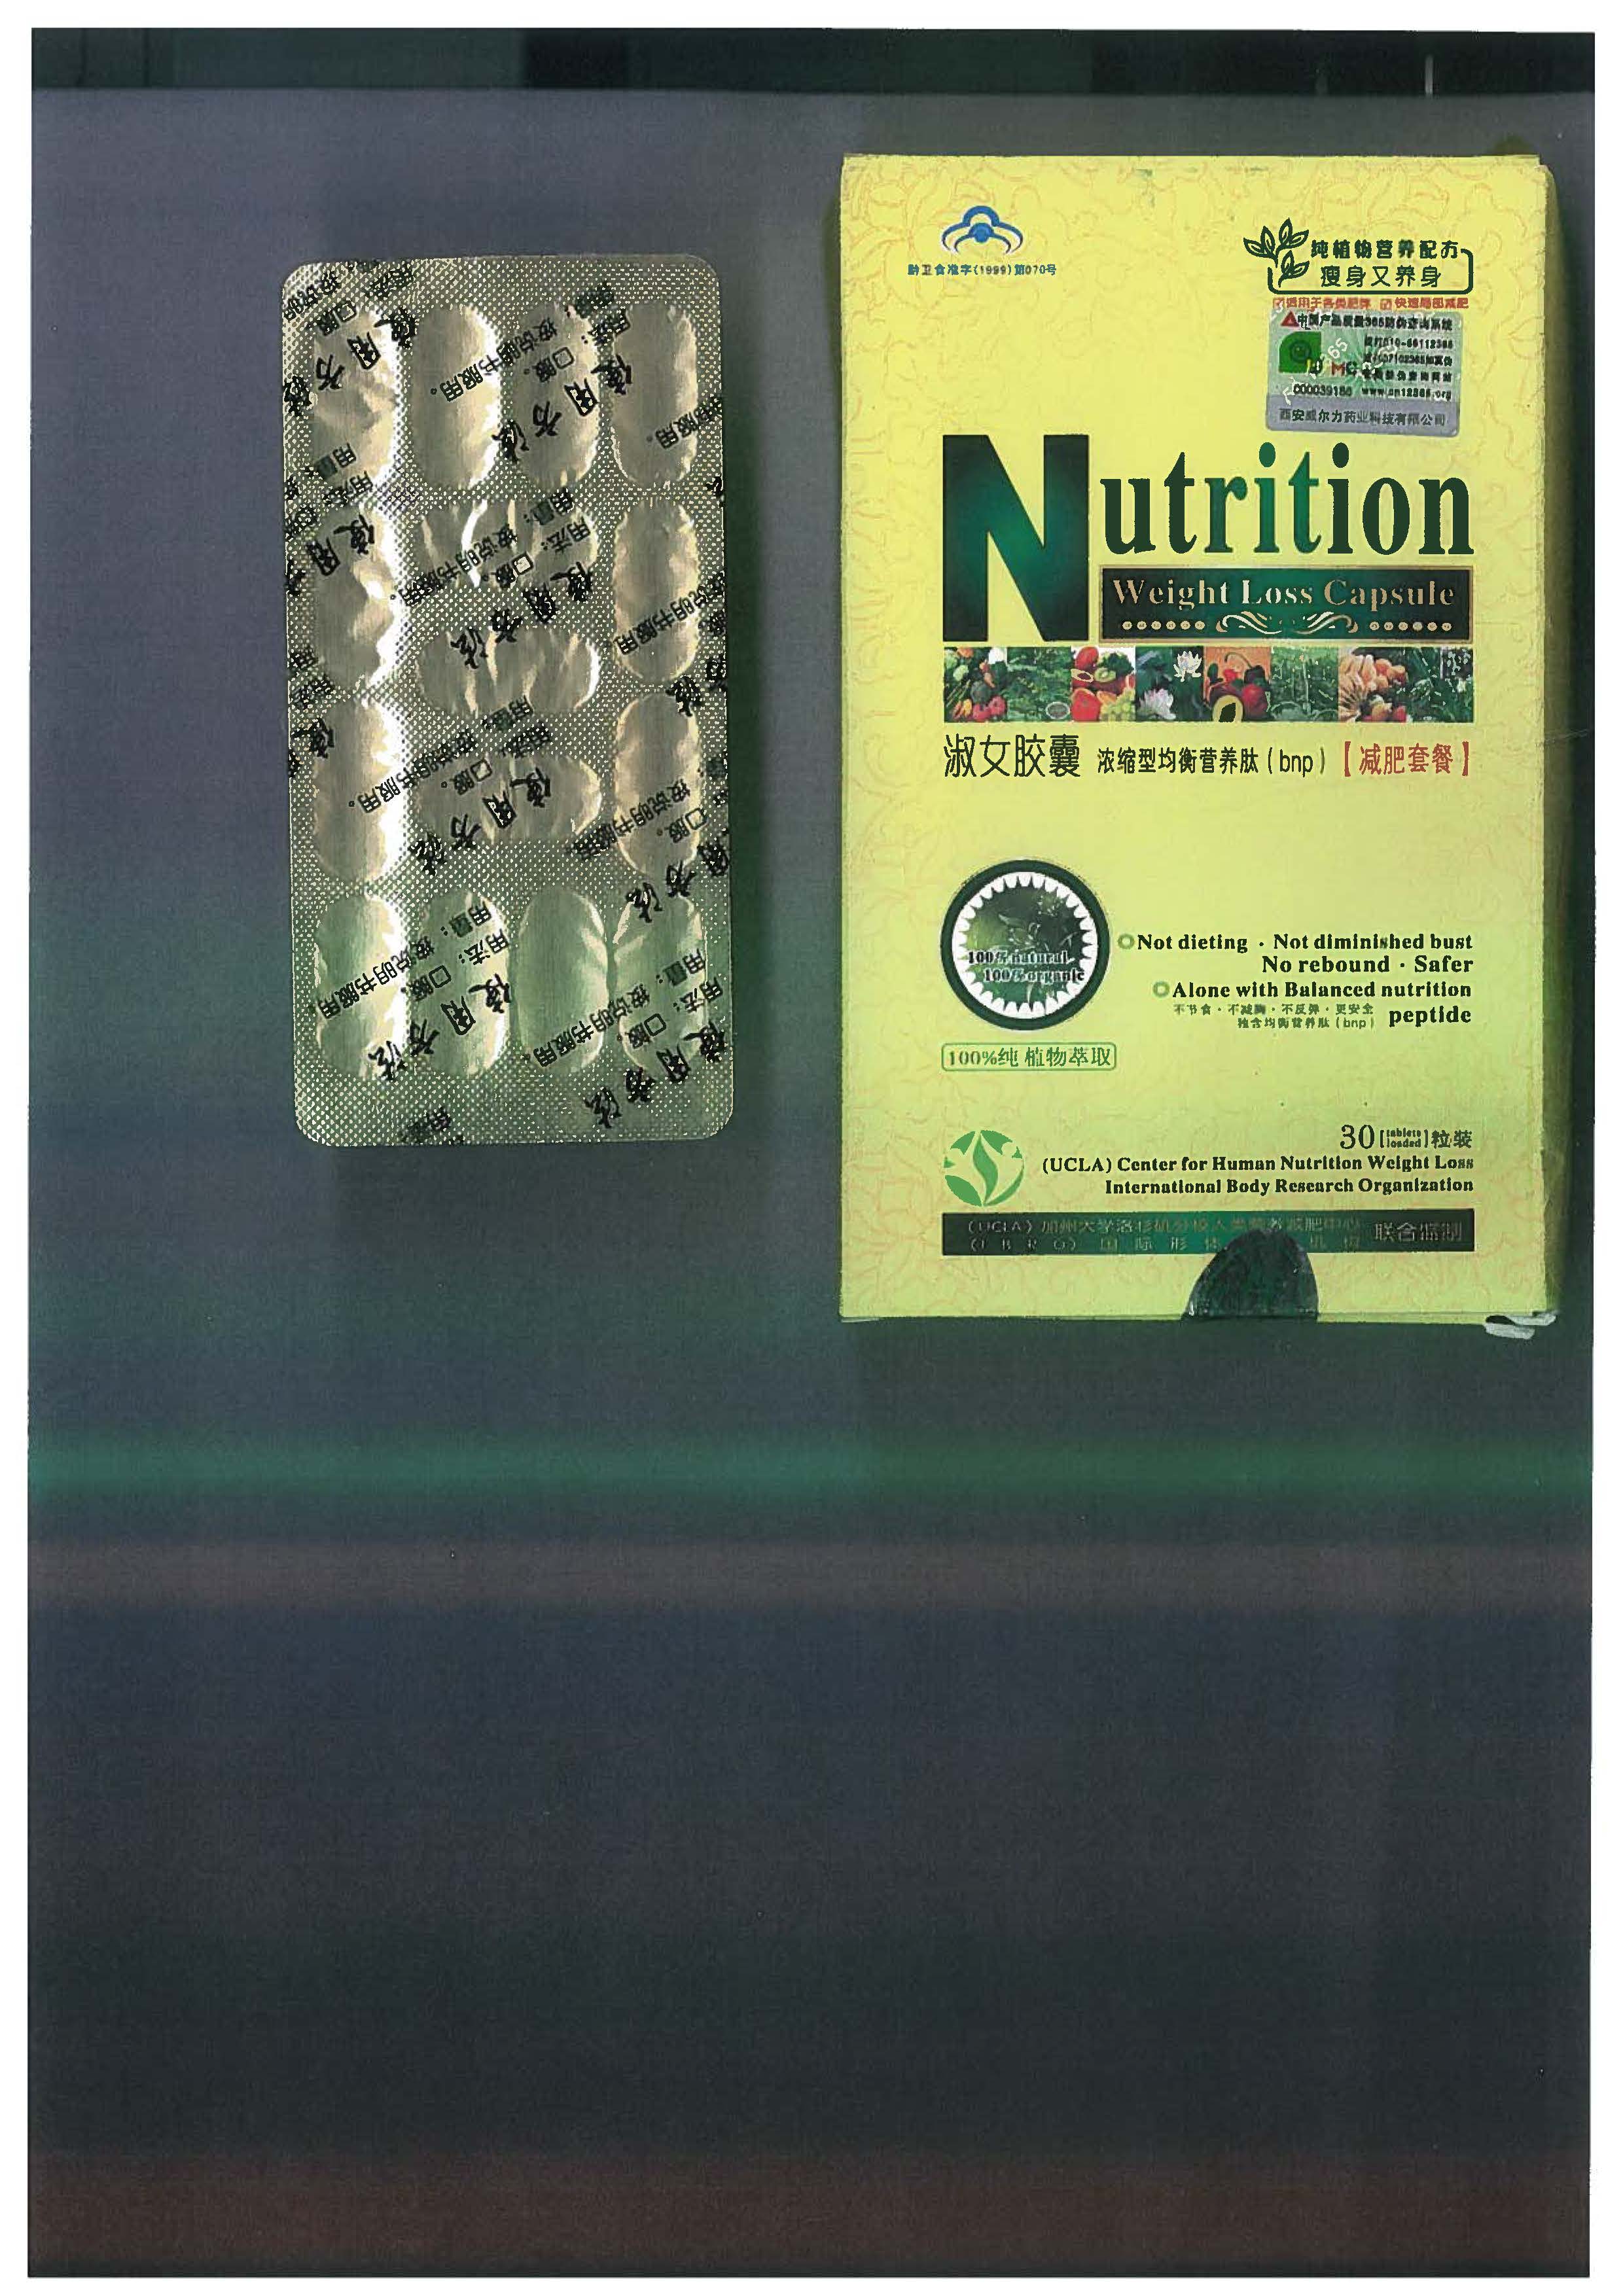 Image of the illigal product: Nutrition (Weight Loss Caps)